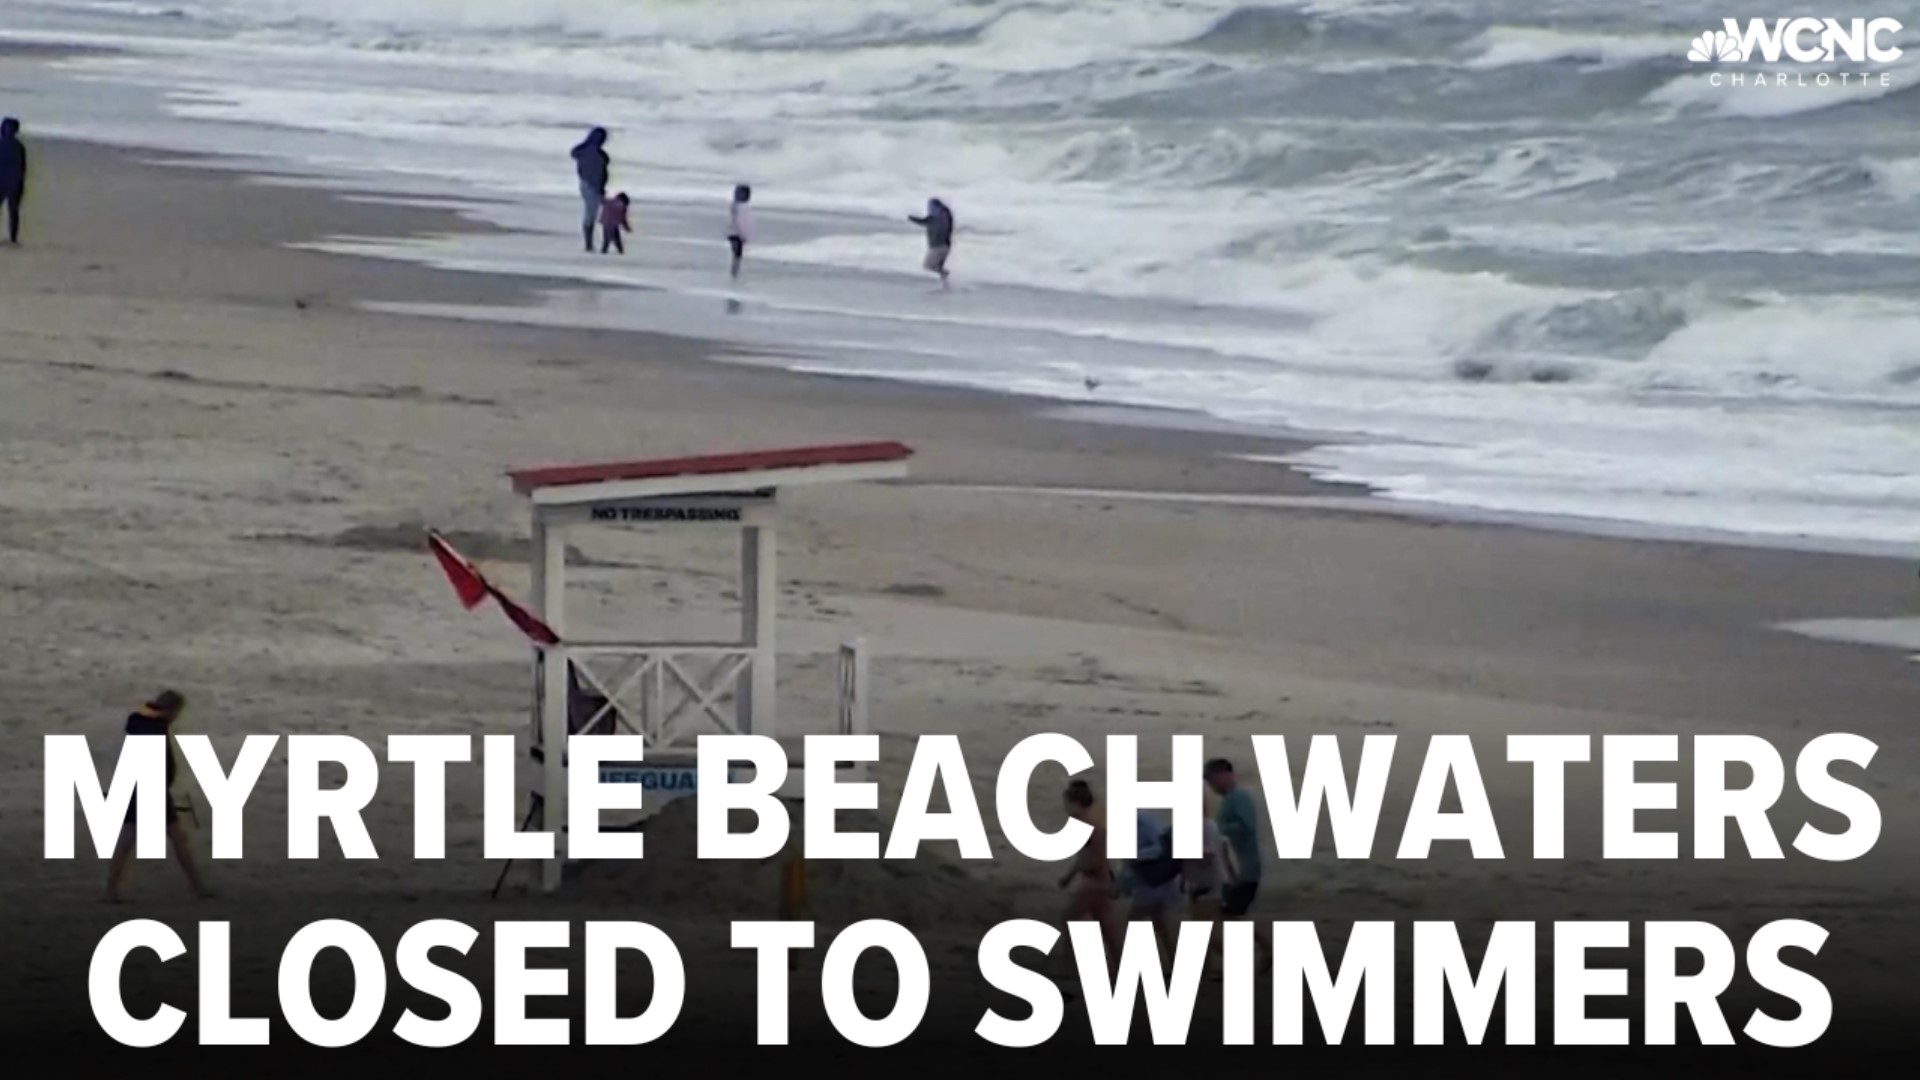 The city of Myrtle Beach put up double red flags on its beaches Friday, meaning swimmers are not allowed in the water.